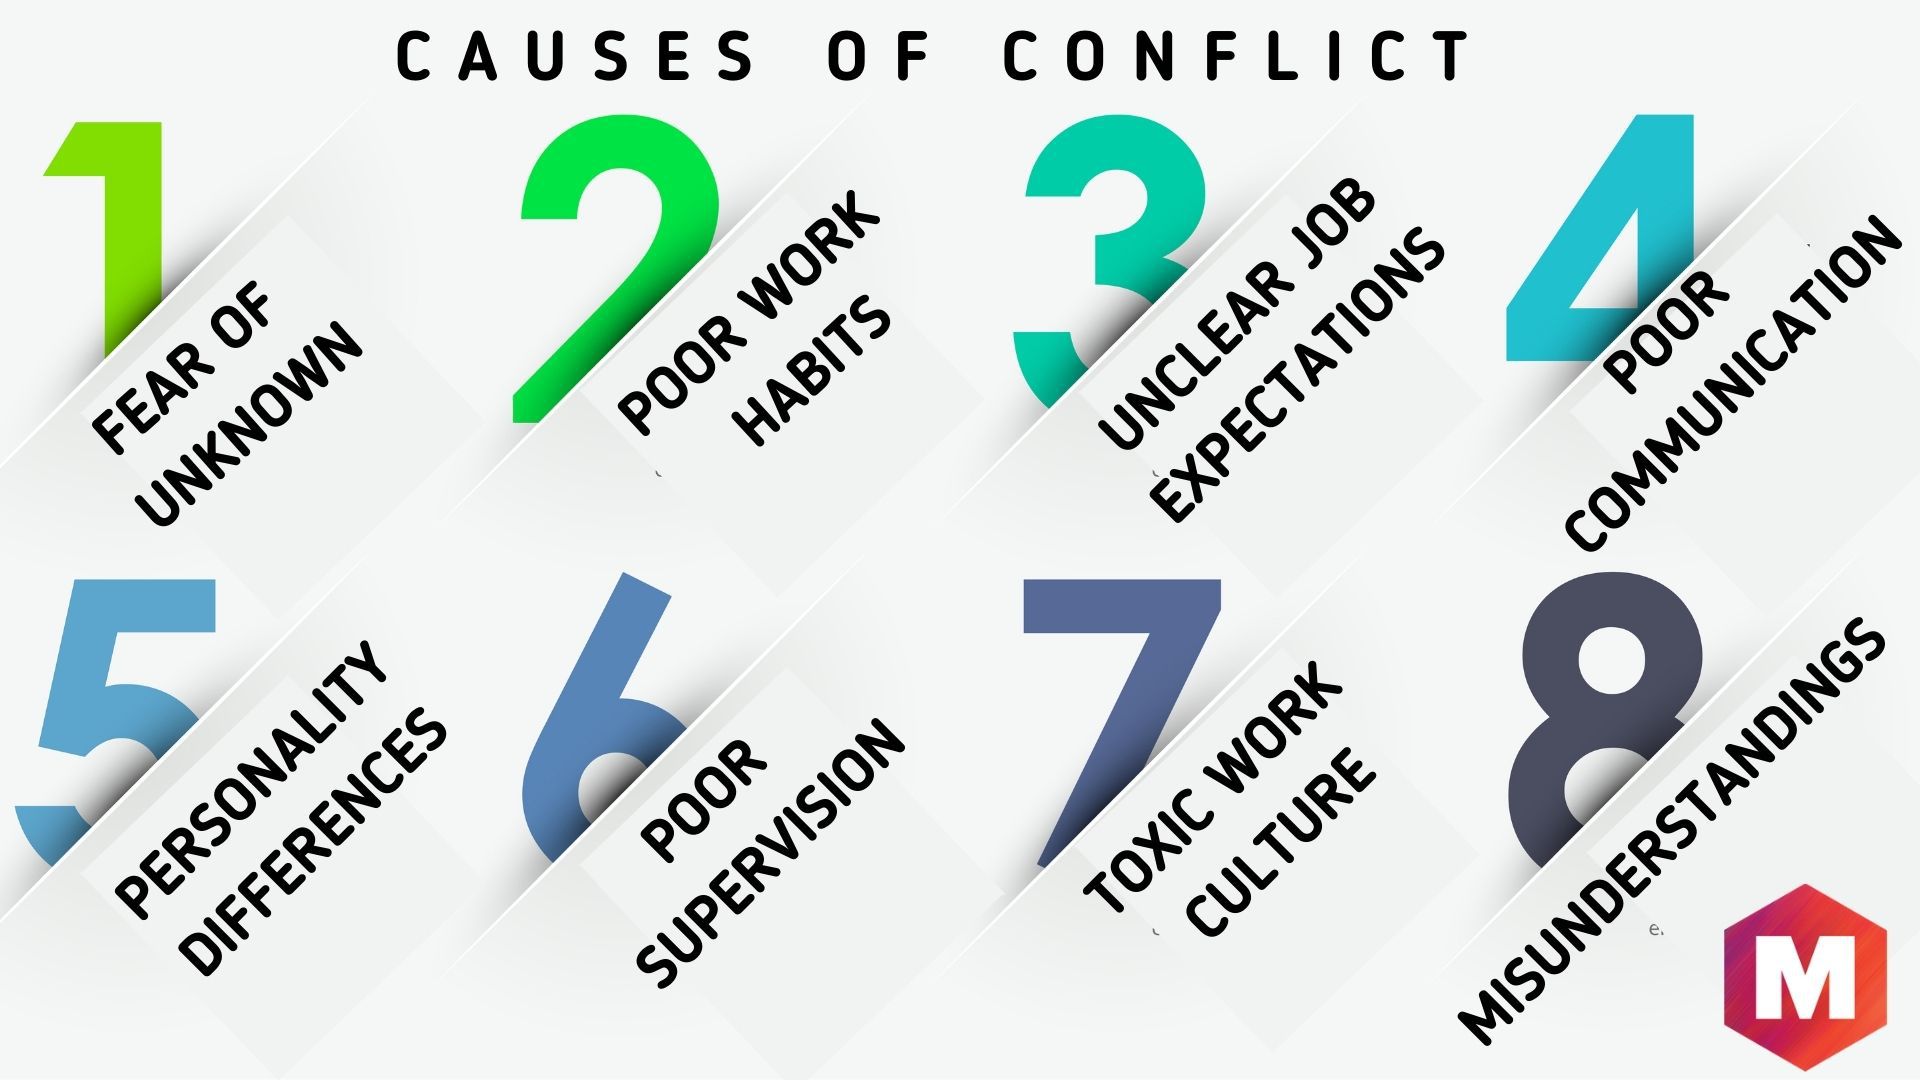 Conflict Triggers in the Workplace